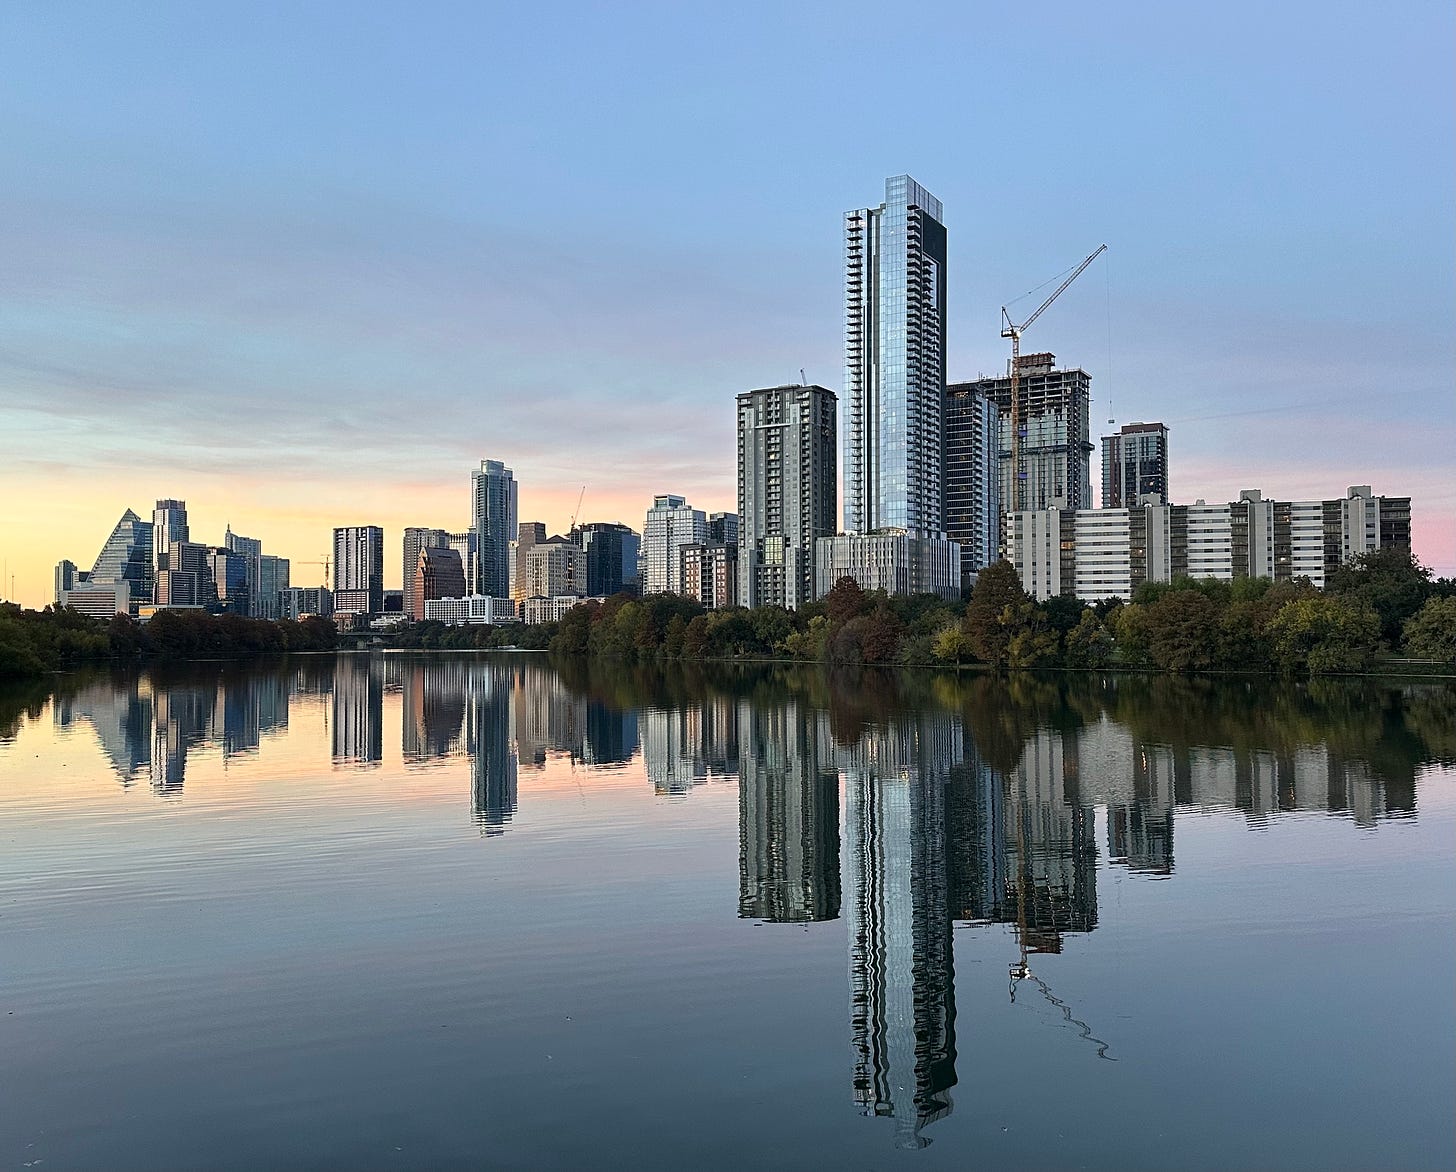 The skyline of Austin, Texas reflects in Lady Bird Lake at sunet.